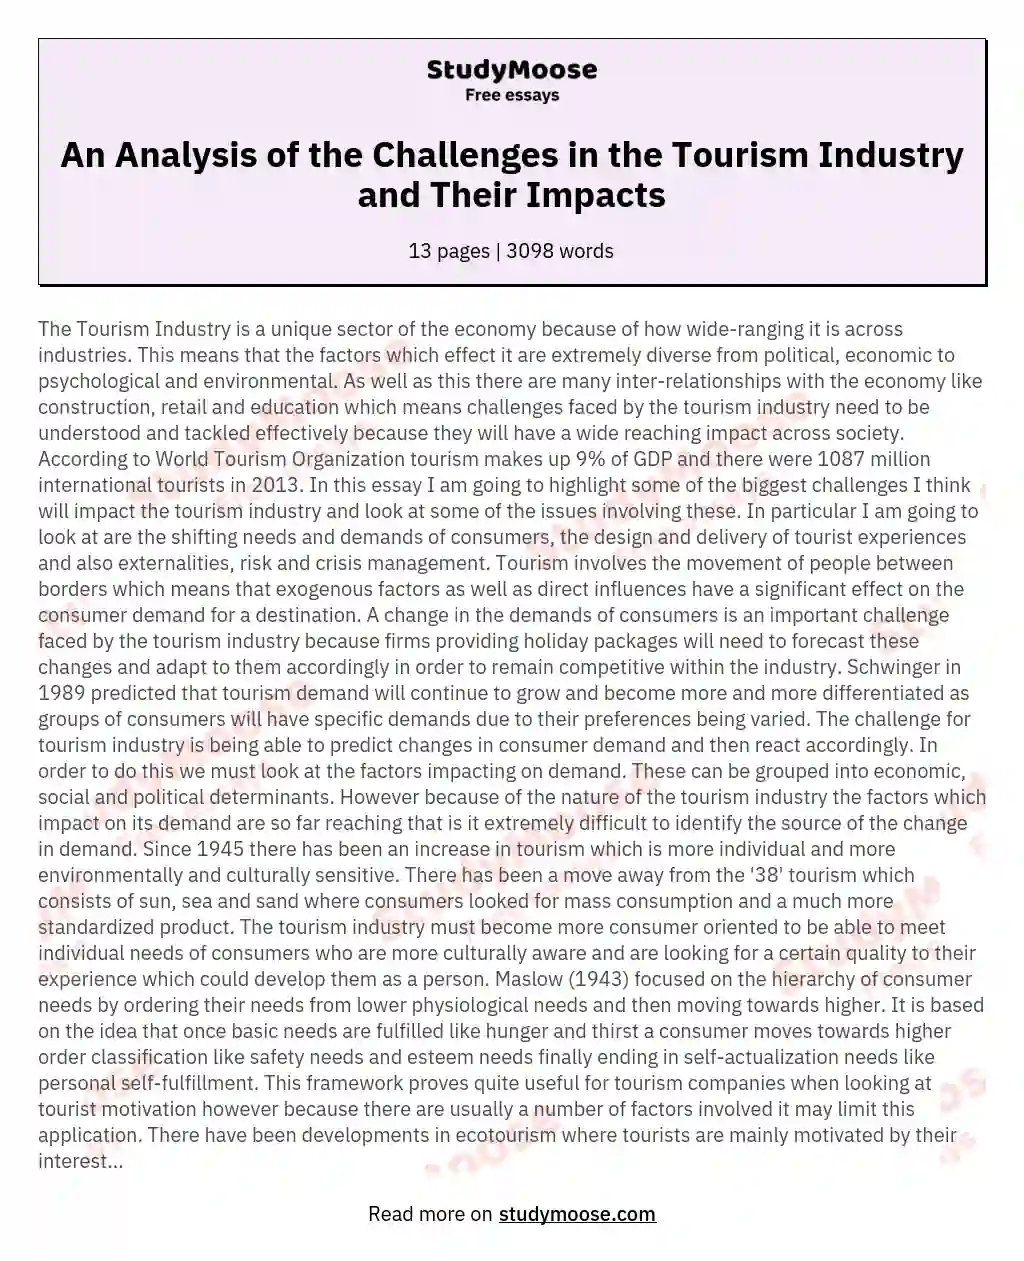 tourism industry essay questions